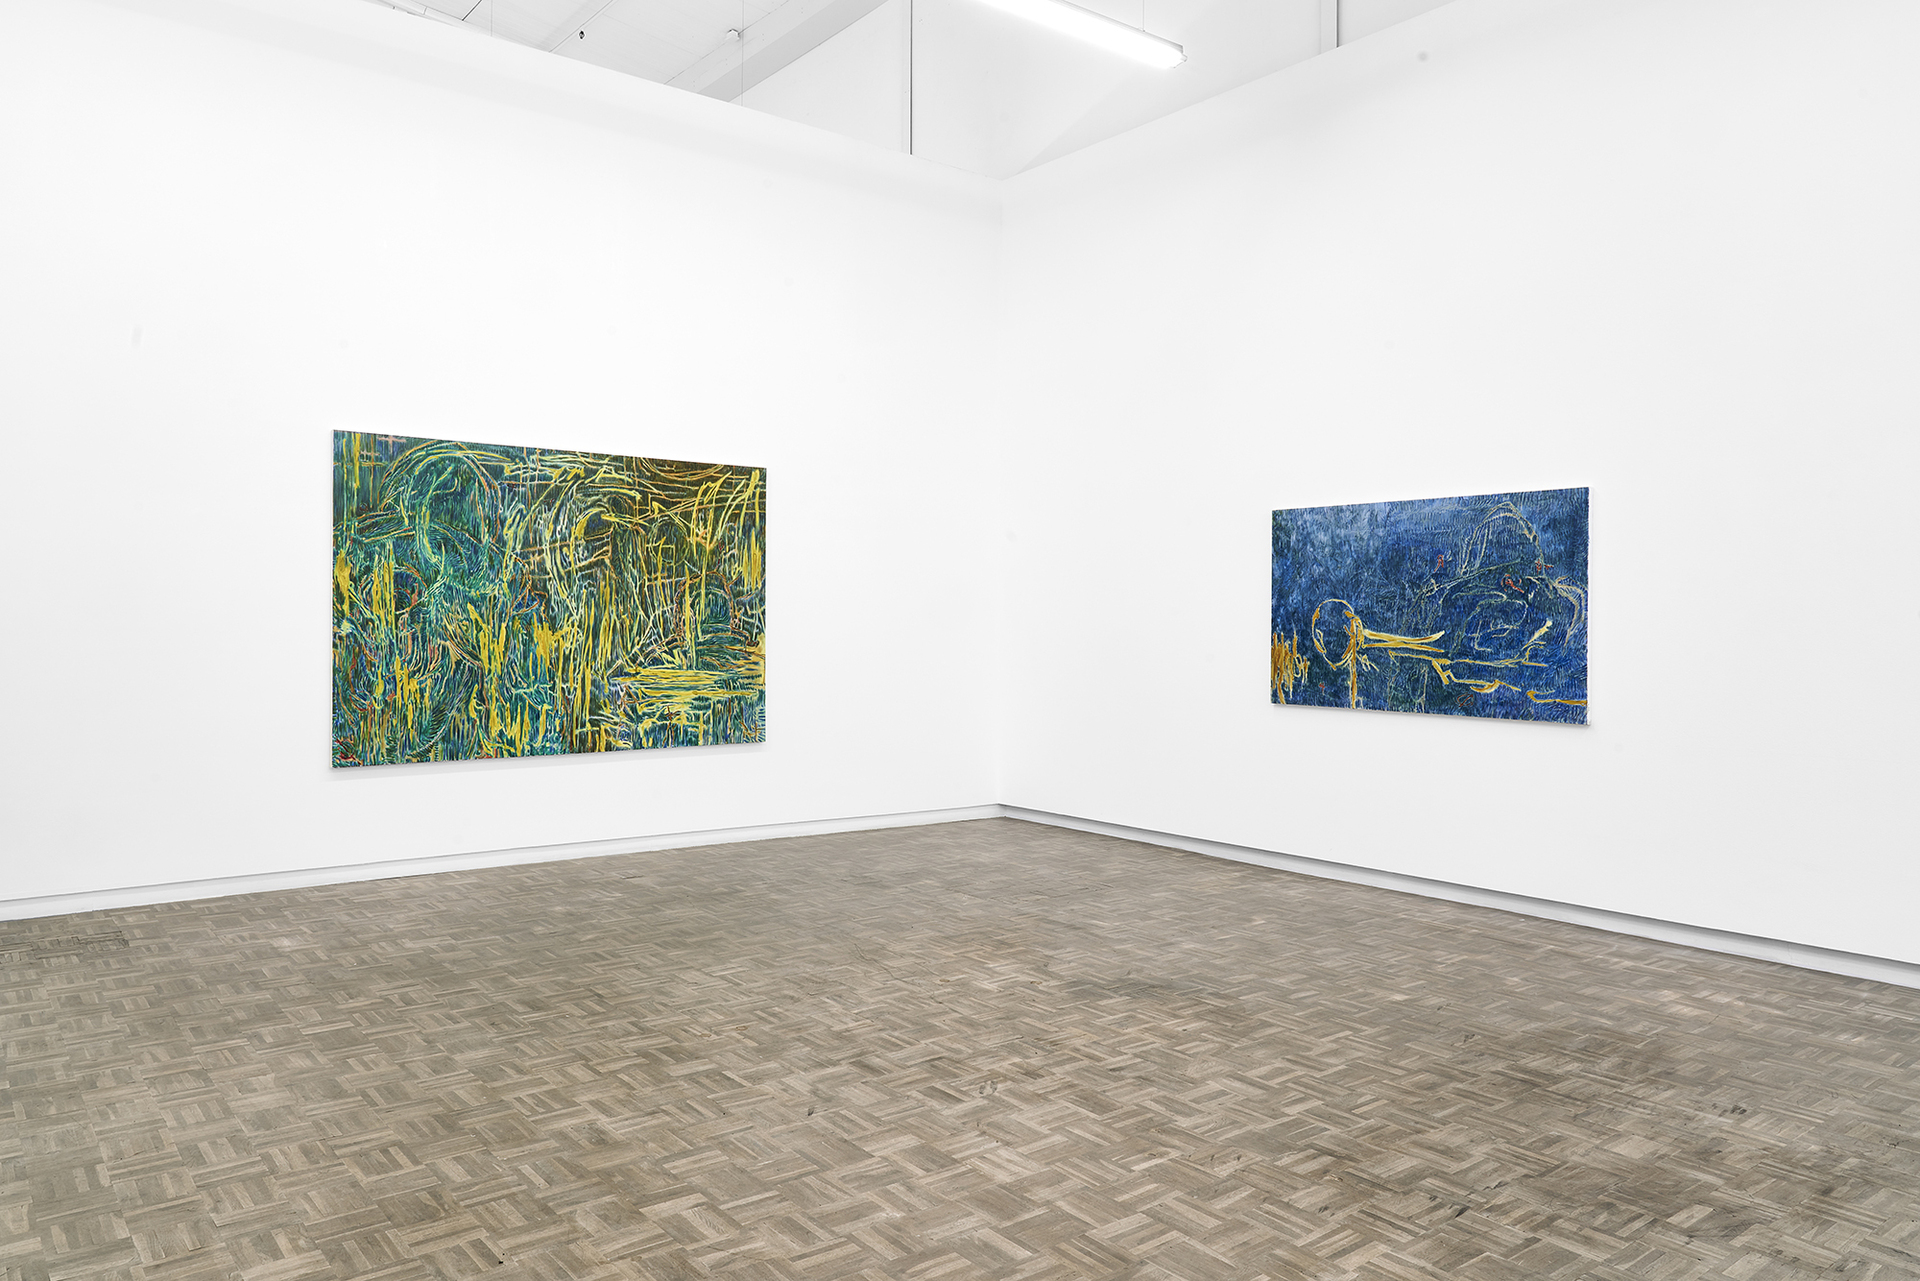 Achraf Touloub, 'Vies paralleles', 2022 | Installation view at blank projects, Cape Town (4)